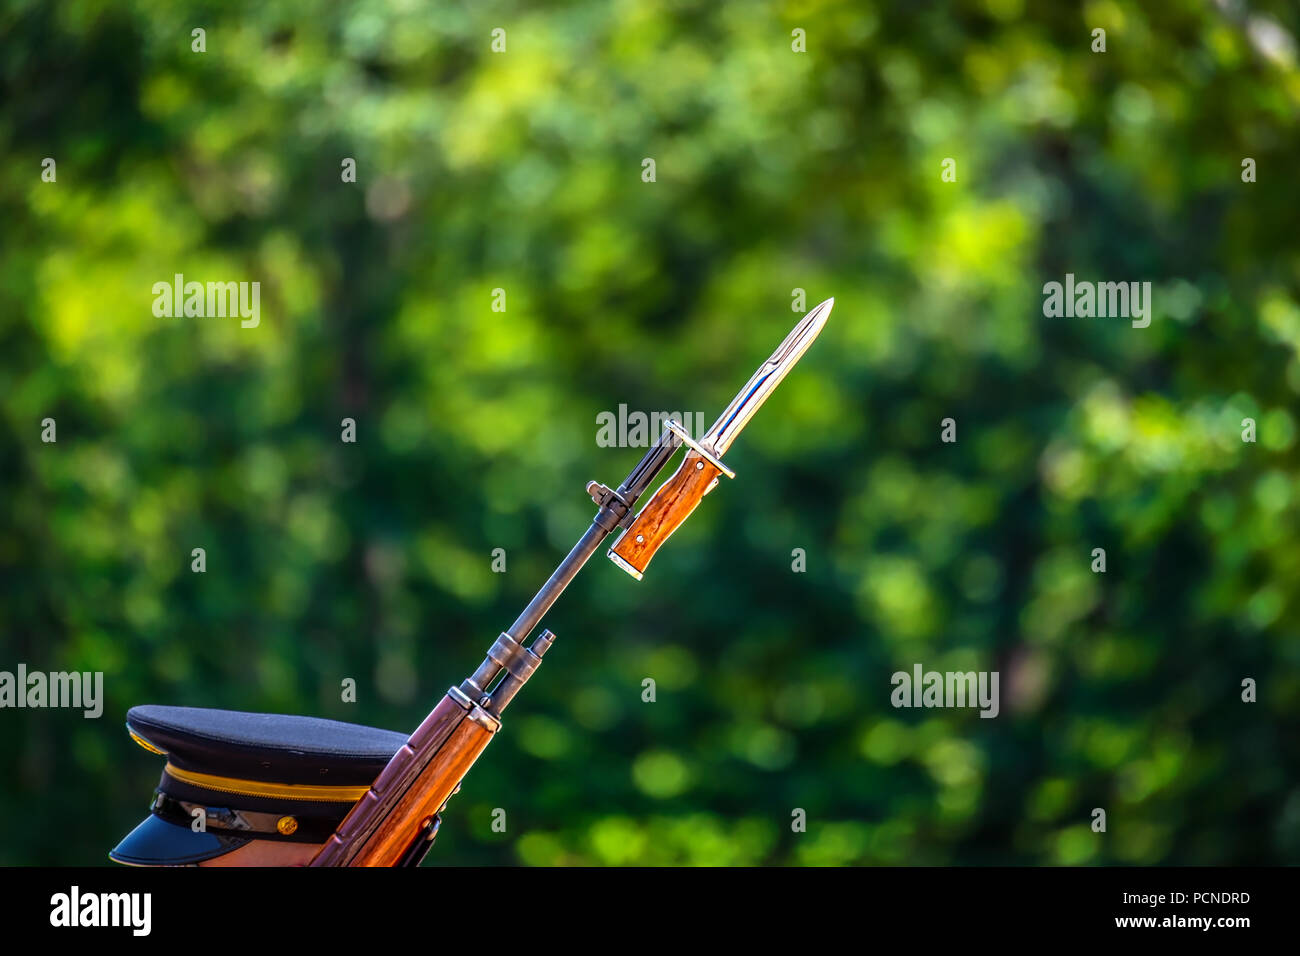 The head and hat of a US Army soldier carrying his rifle on guard duty. Stock Photo